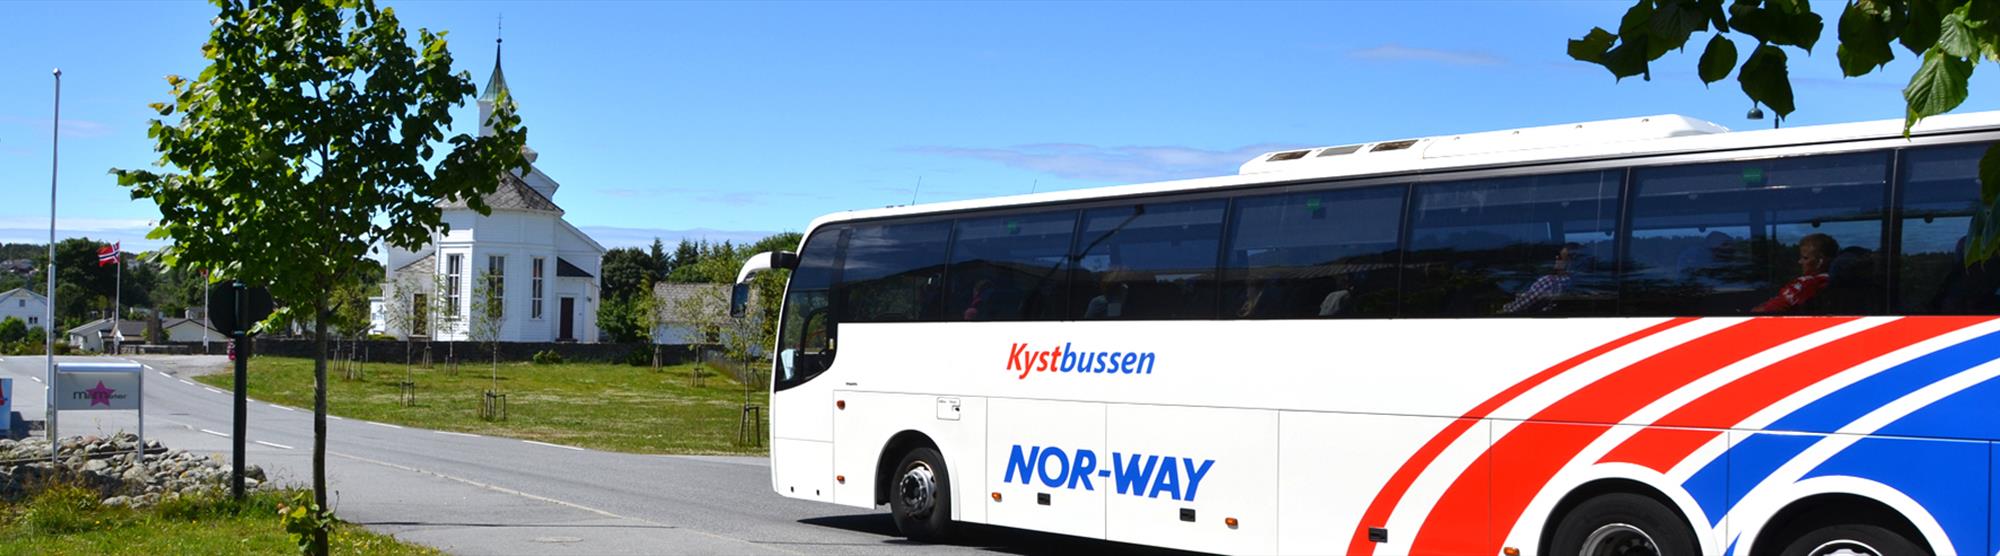 To Bergen by bus